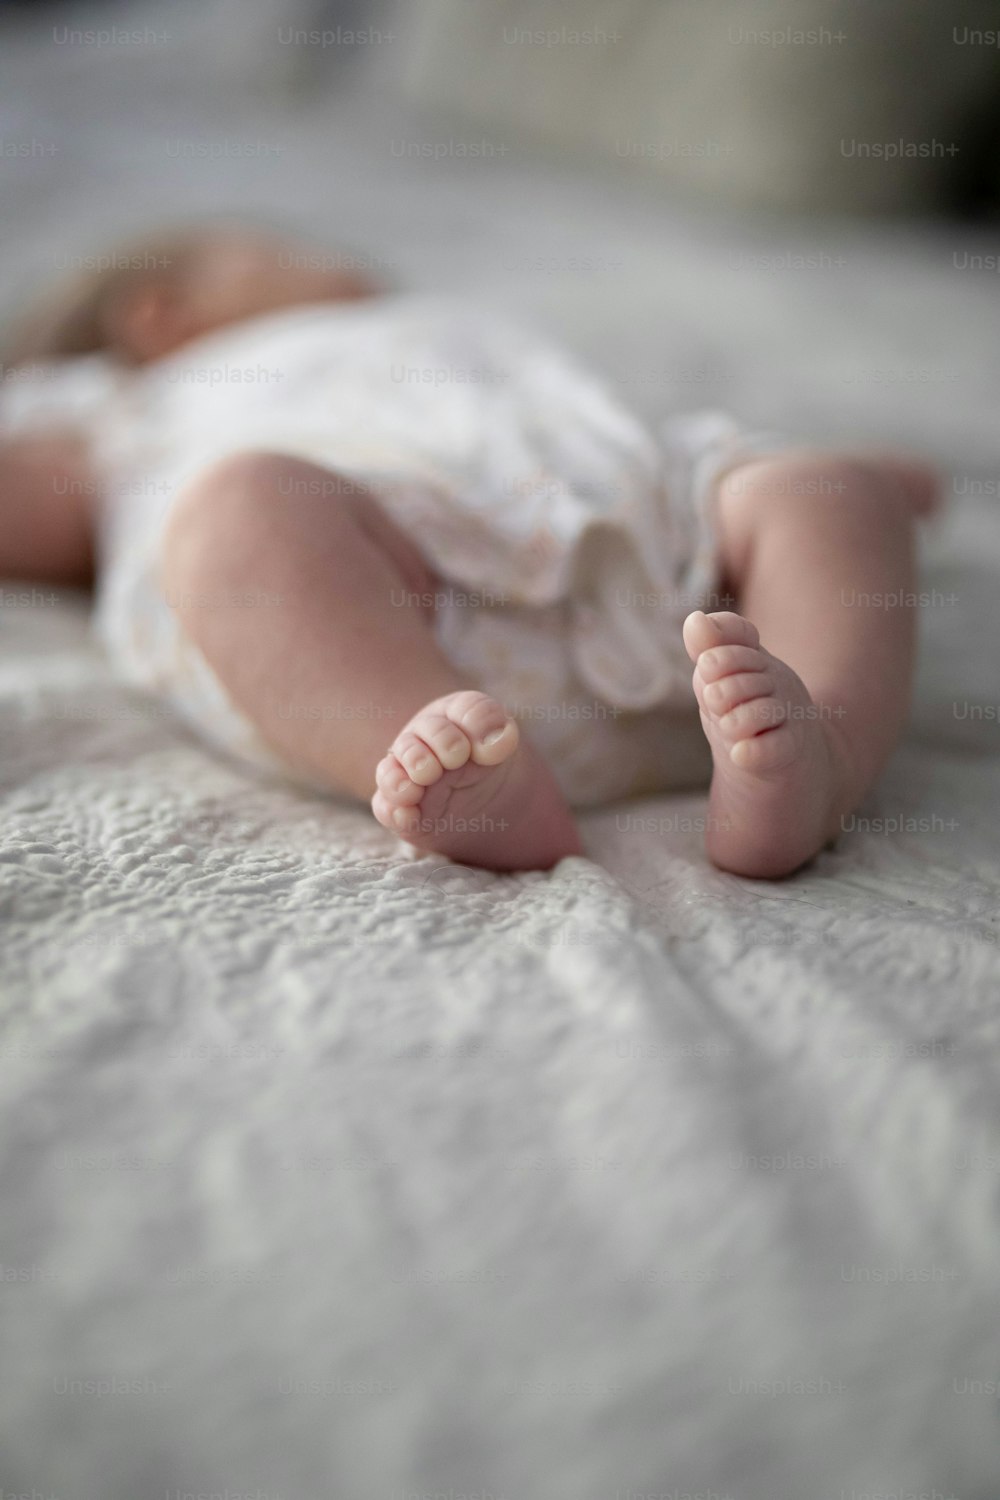 100+ Small Baby Pictures [HD] | Download Free Images on Unsplash